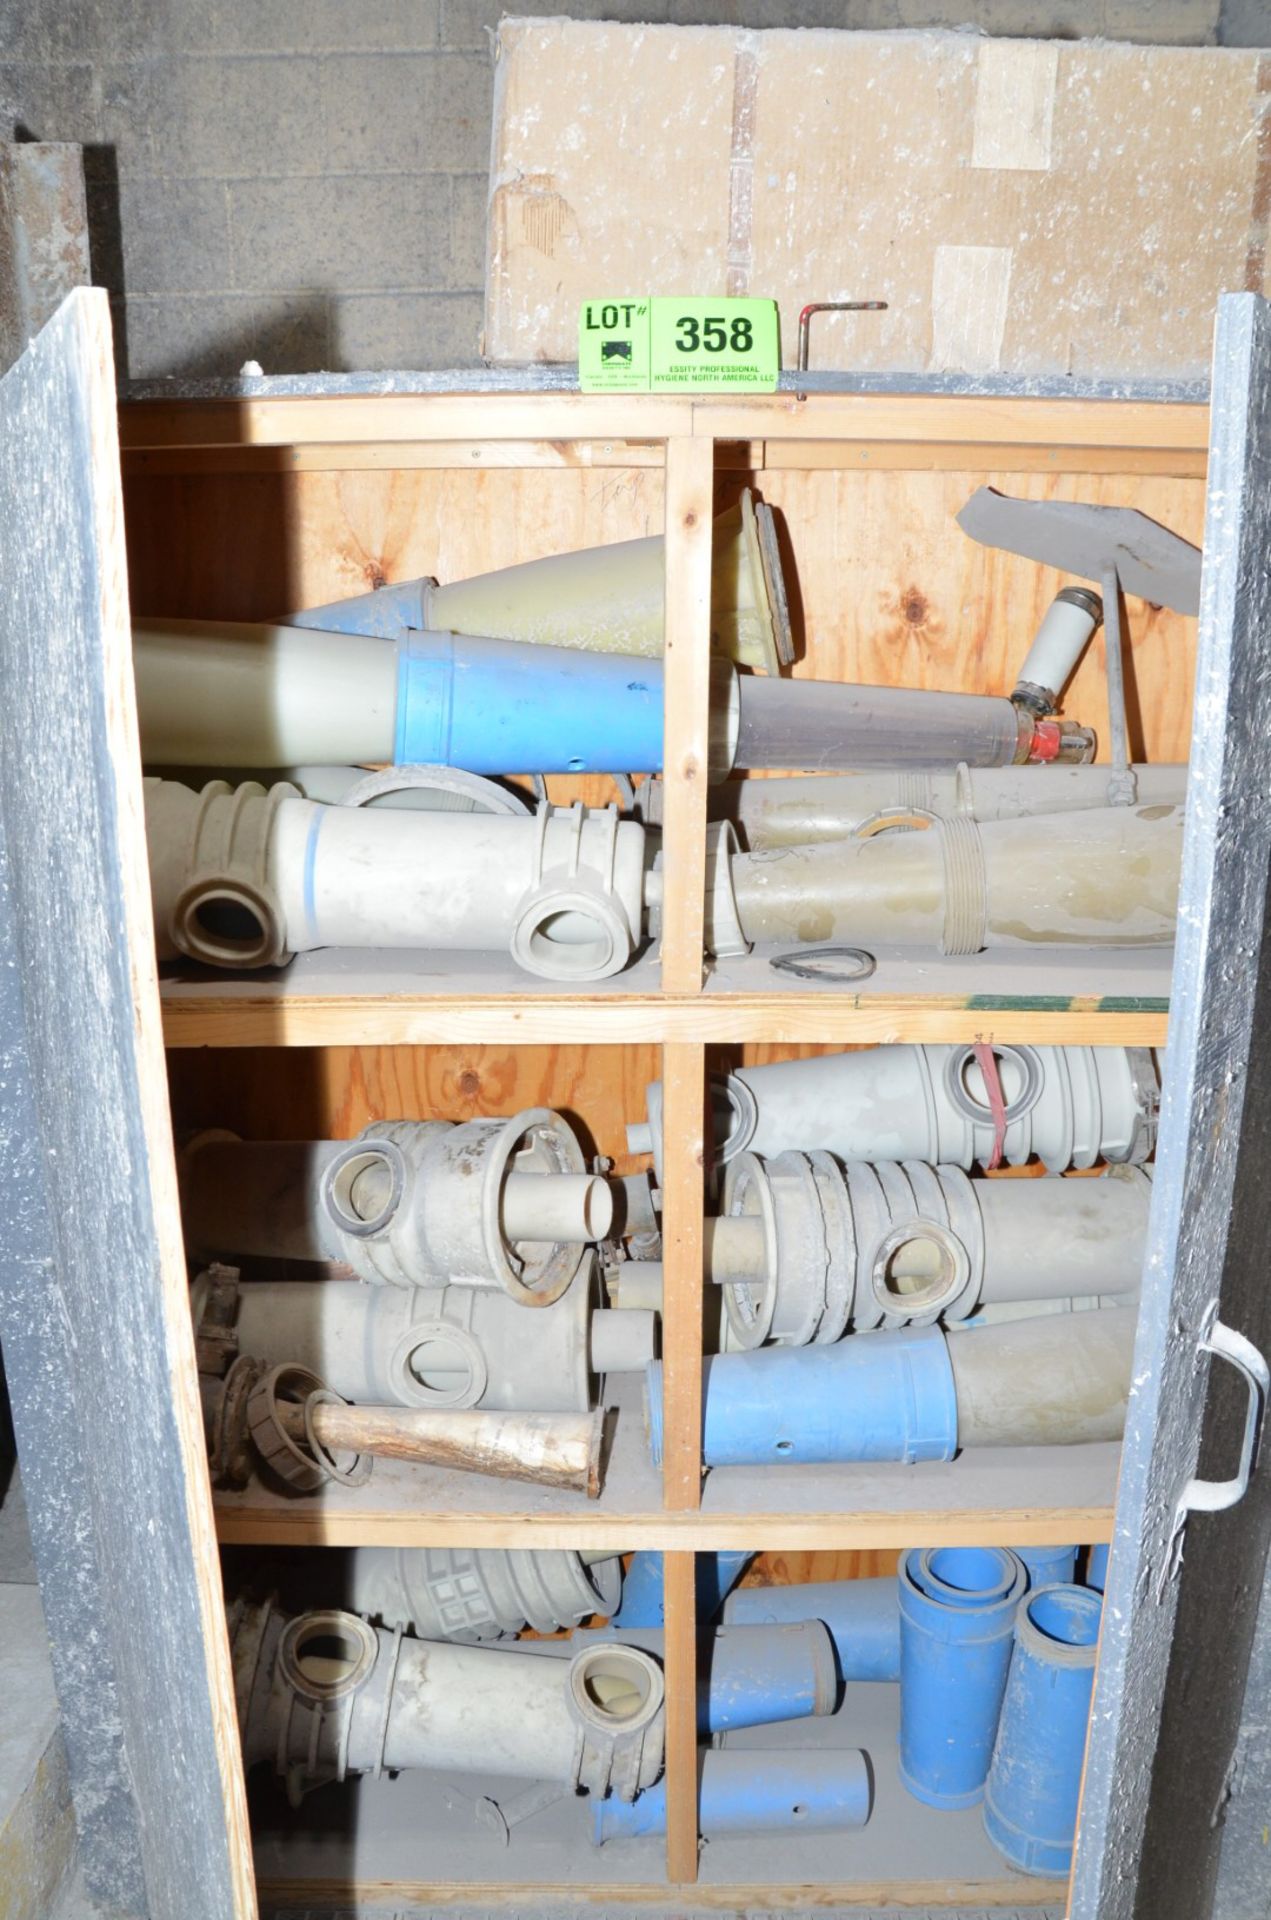 LOT/ CABINET WITH SPARE HD CLEANER CYCLONES [RIGGING FEE FOR LOT #358 - $125 USD PLUS APPLICABLE